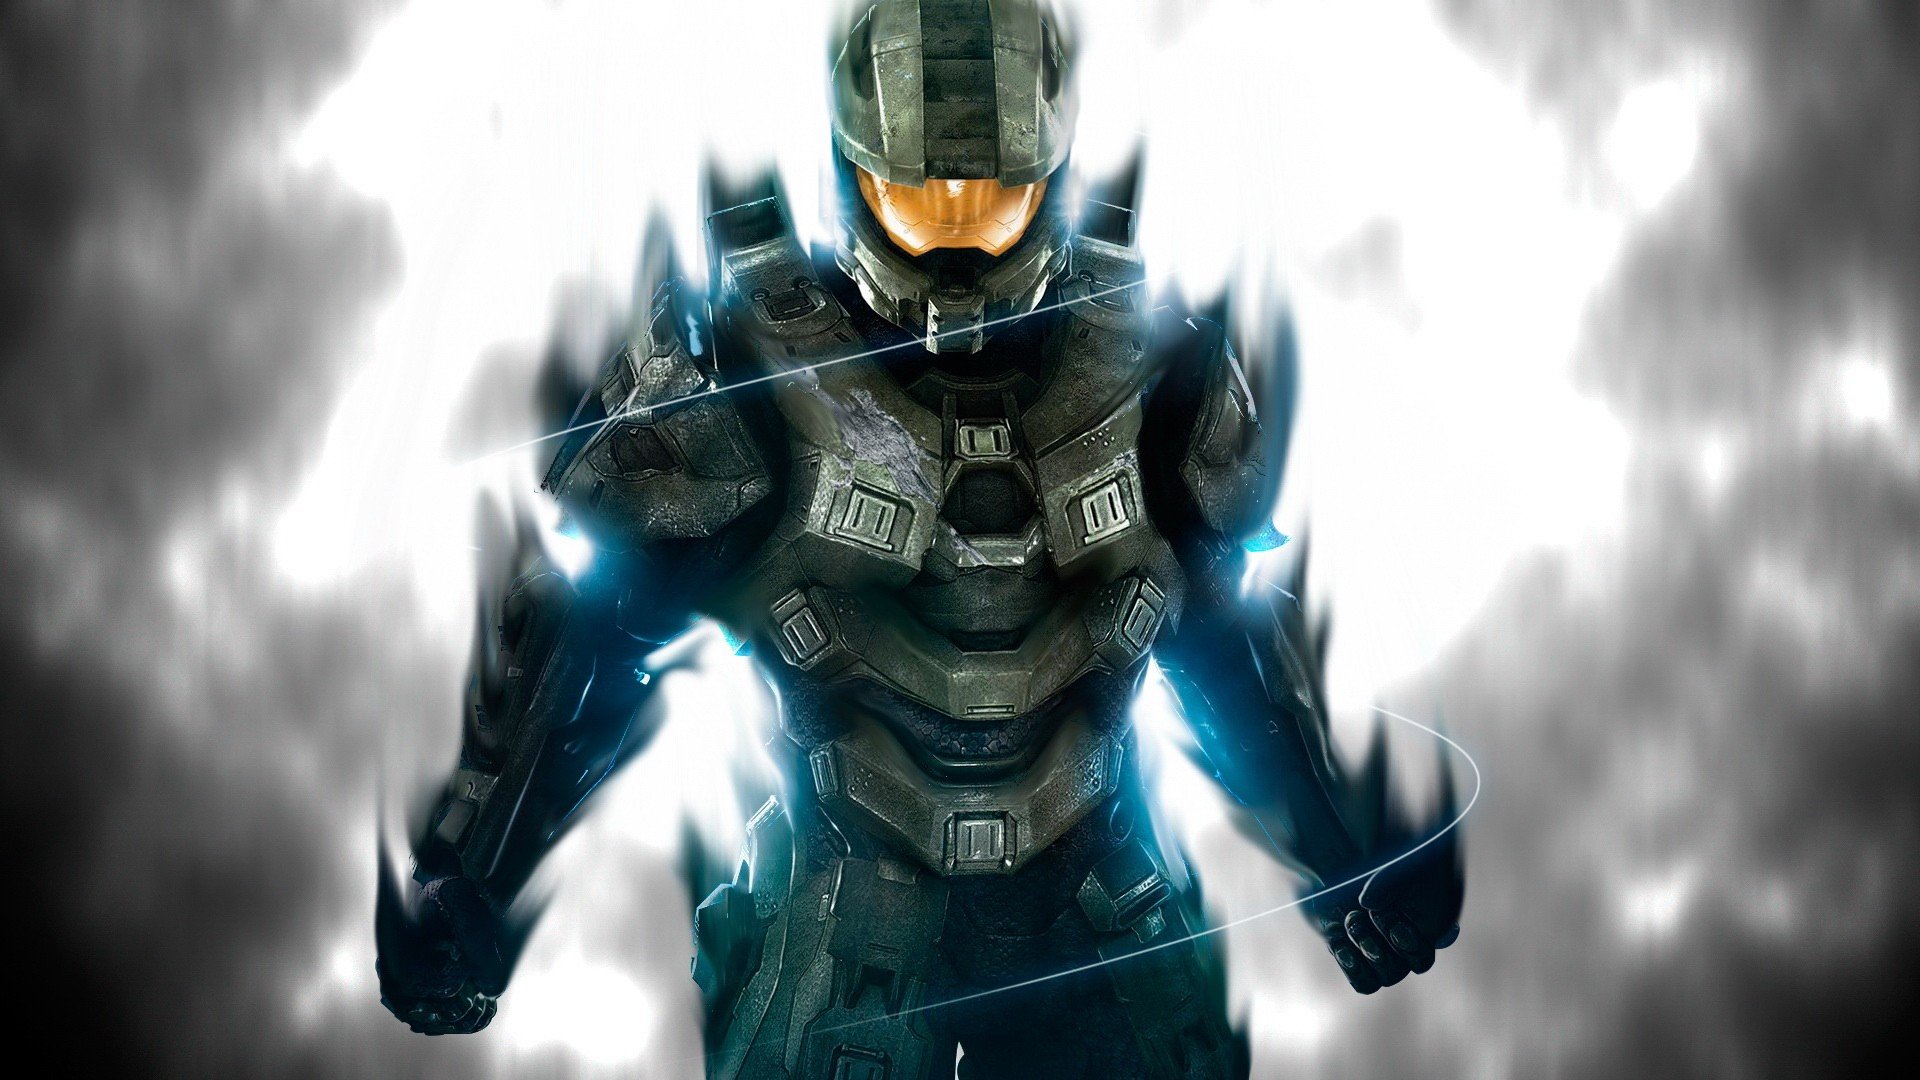 halo, Master, Chief, Collection, Sci fi, Shooter, Action, Futuristic, Fps, War, Fighting, 1halomasterchief Wallpaper